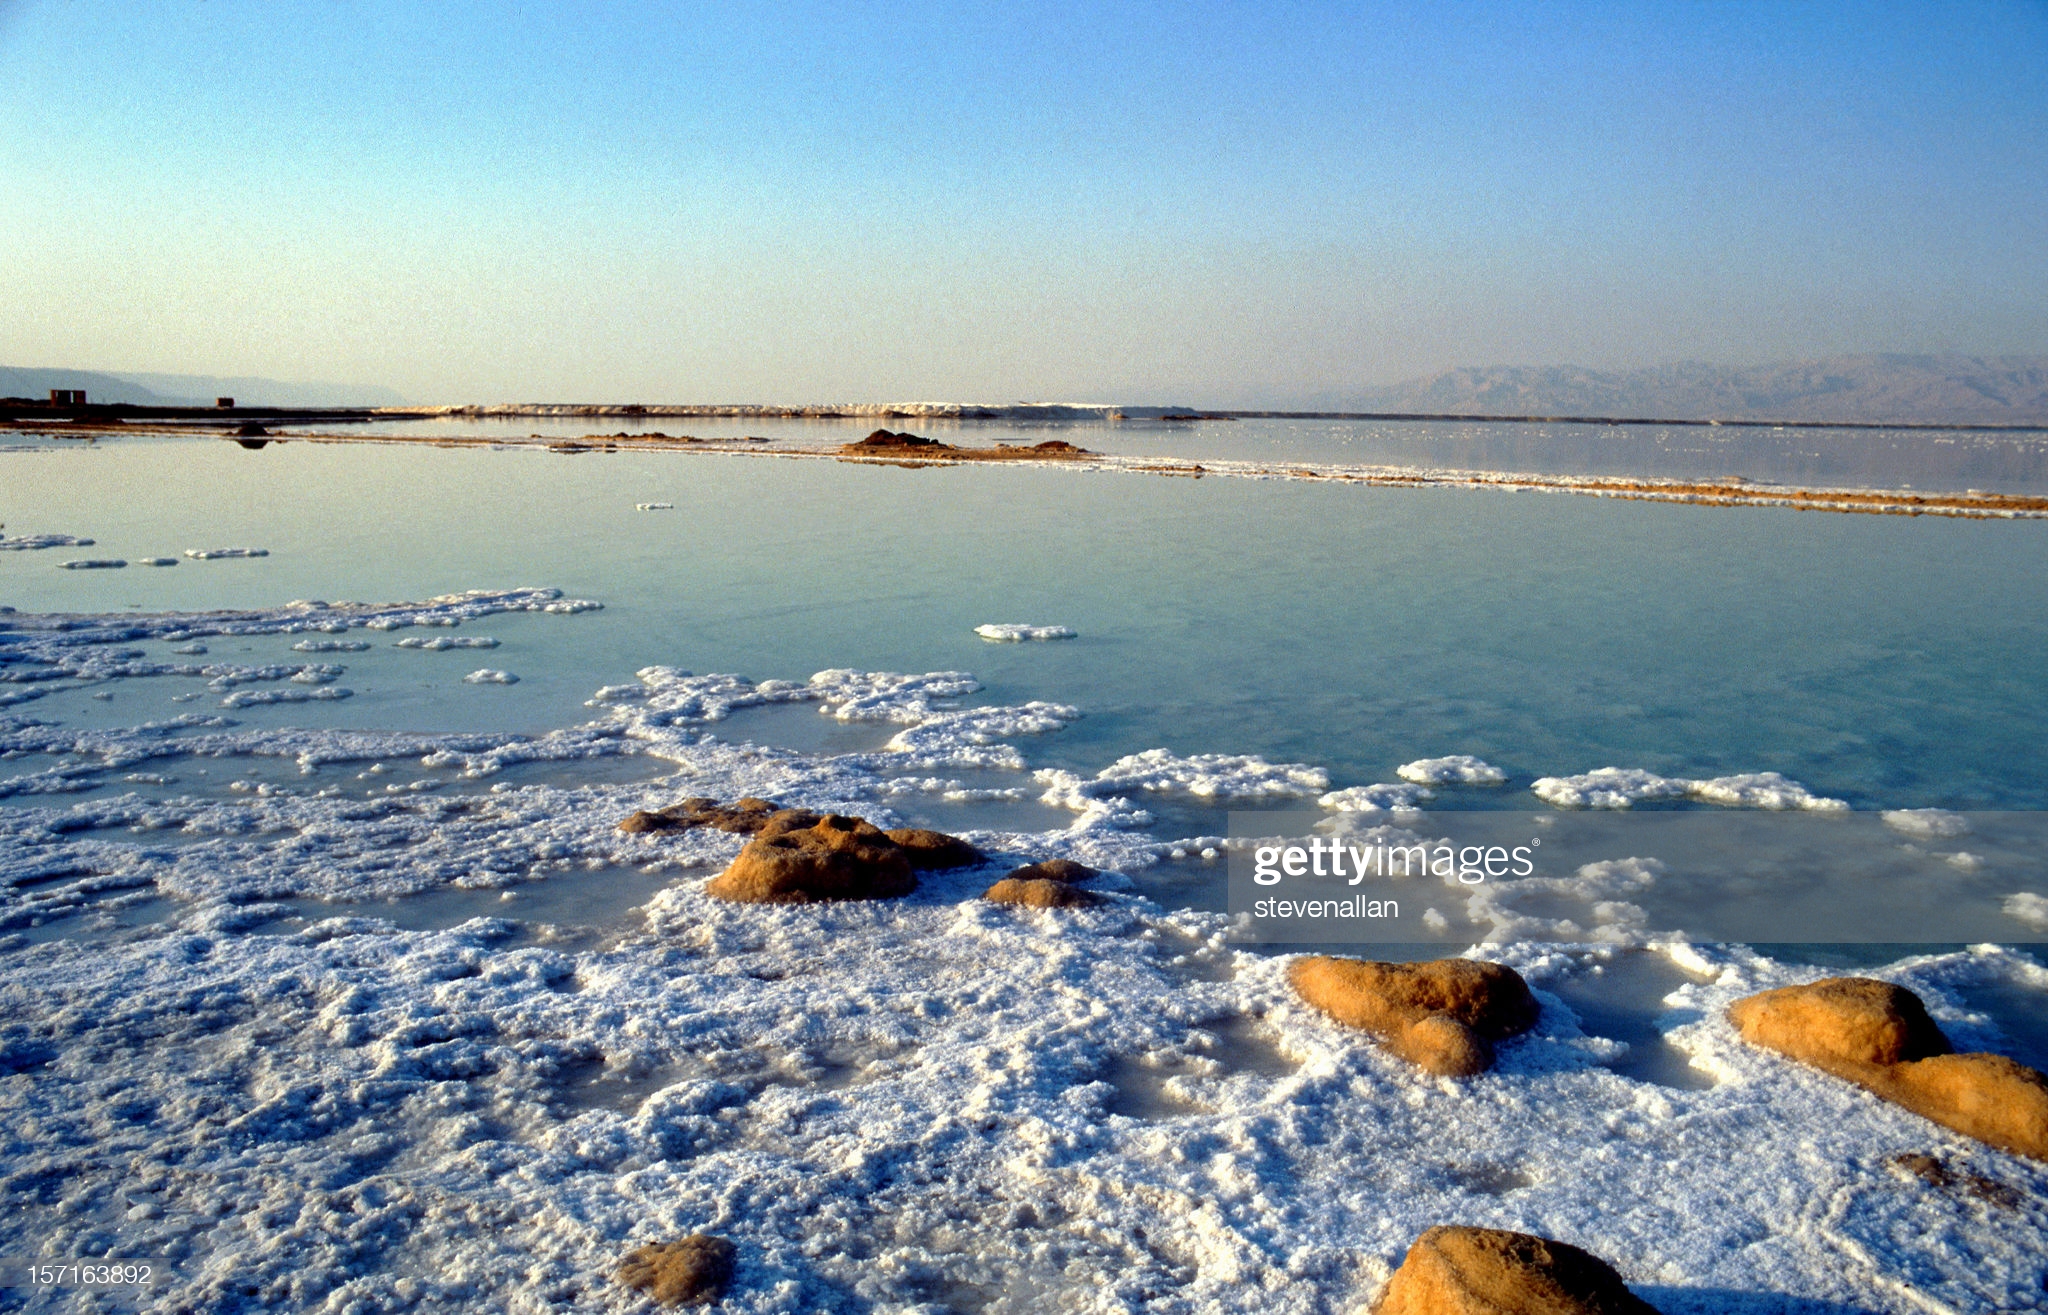 layer-of-salt-on-the-dead-sea-in-israel-picture-id157163892